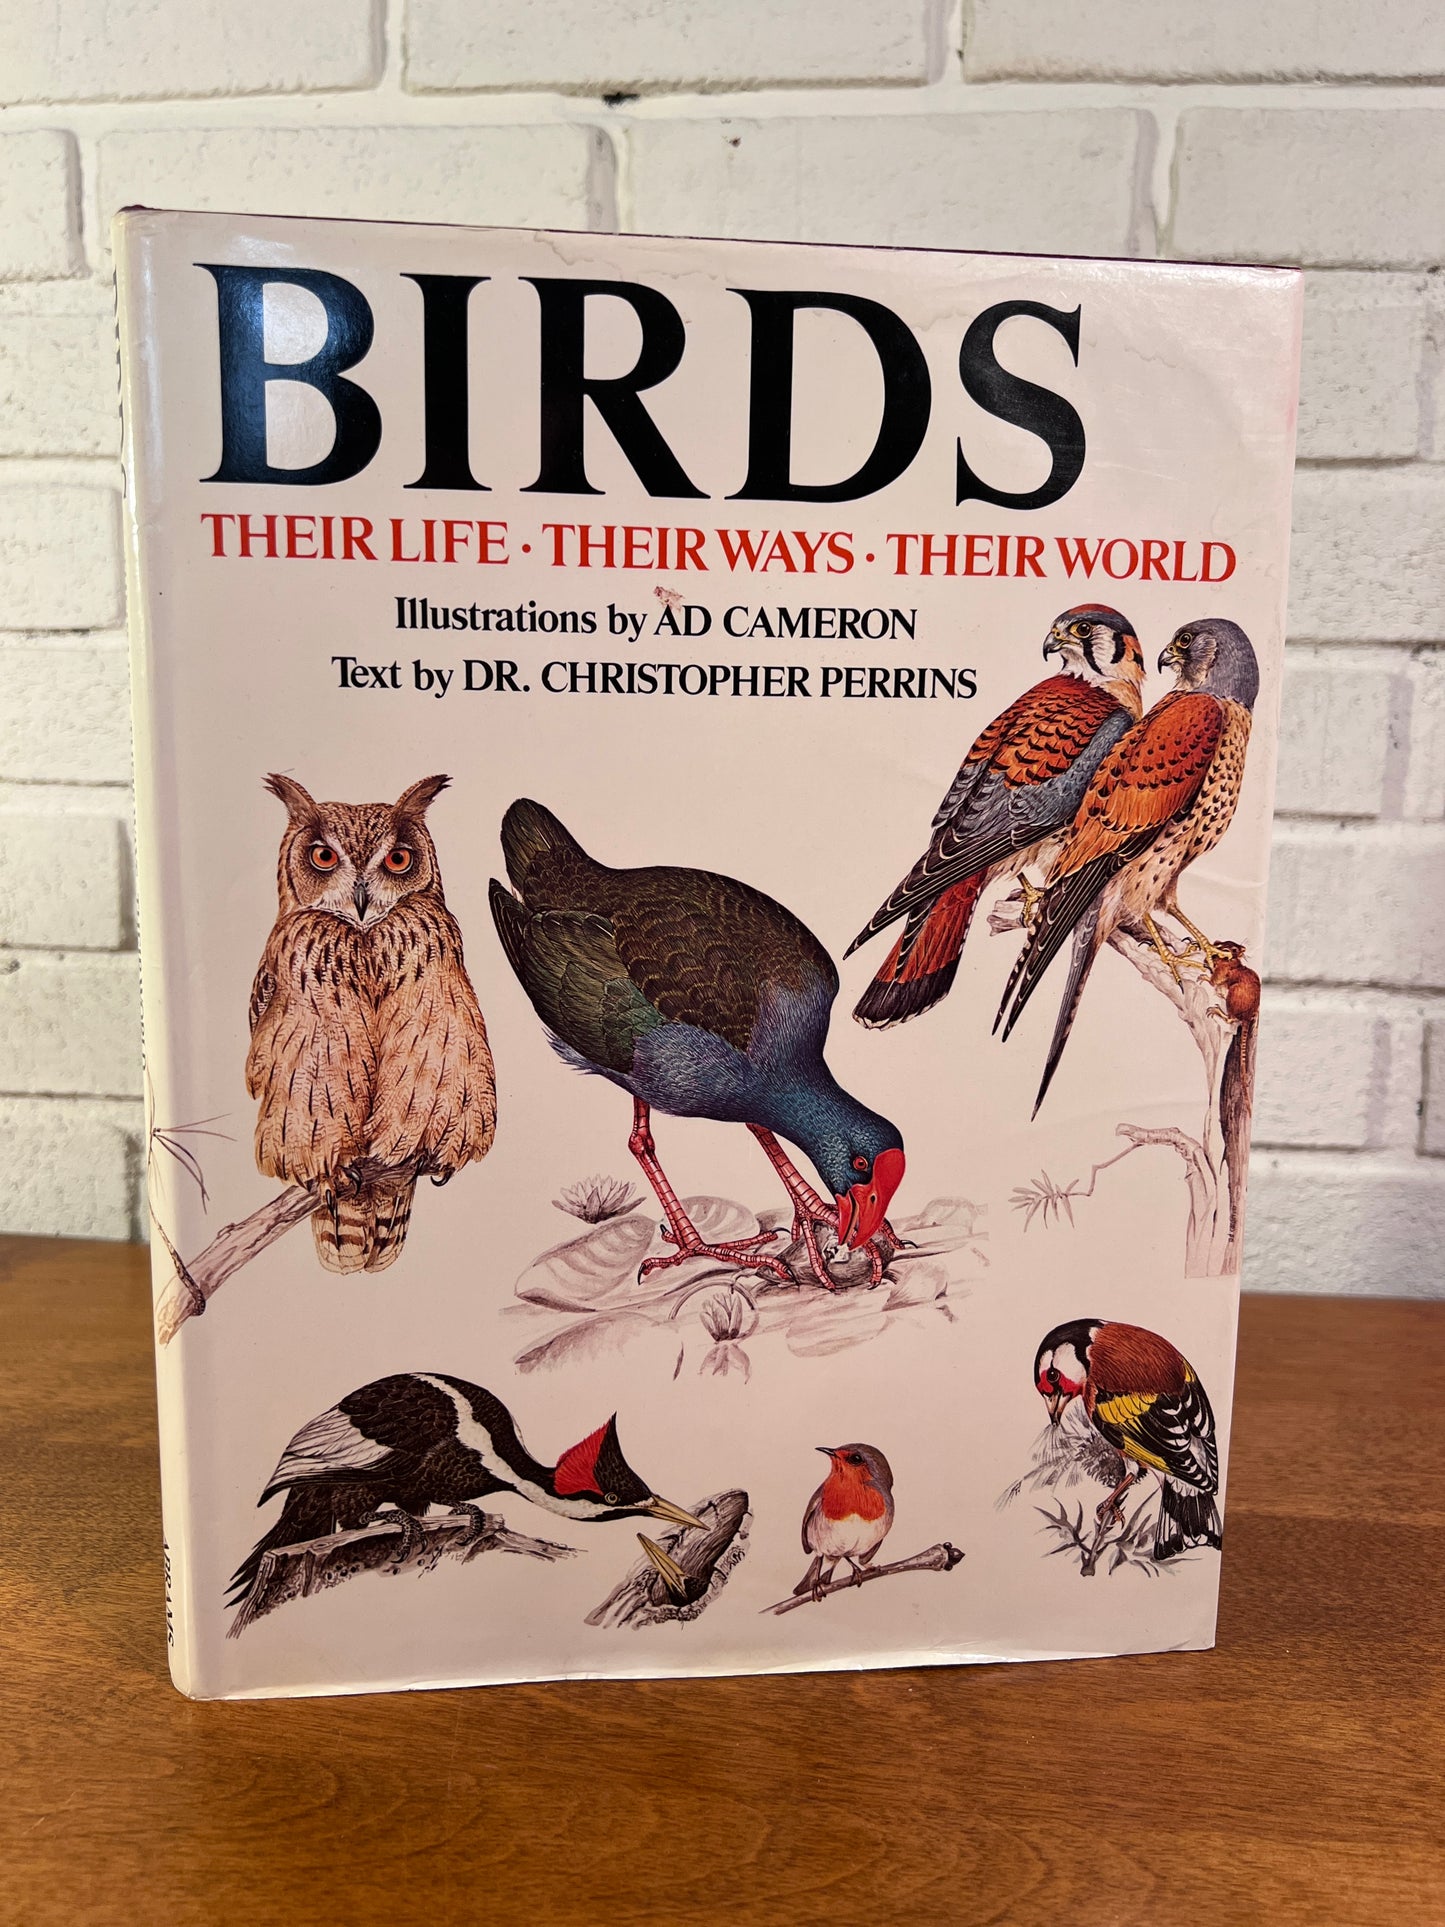 Birds: Their Life -Their Ways - Their World by Dr. Christopher Perkins